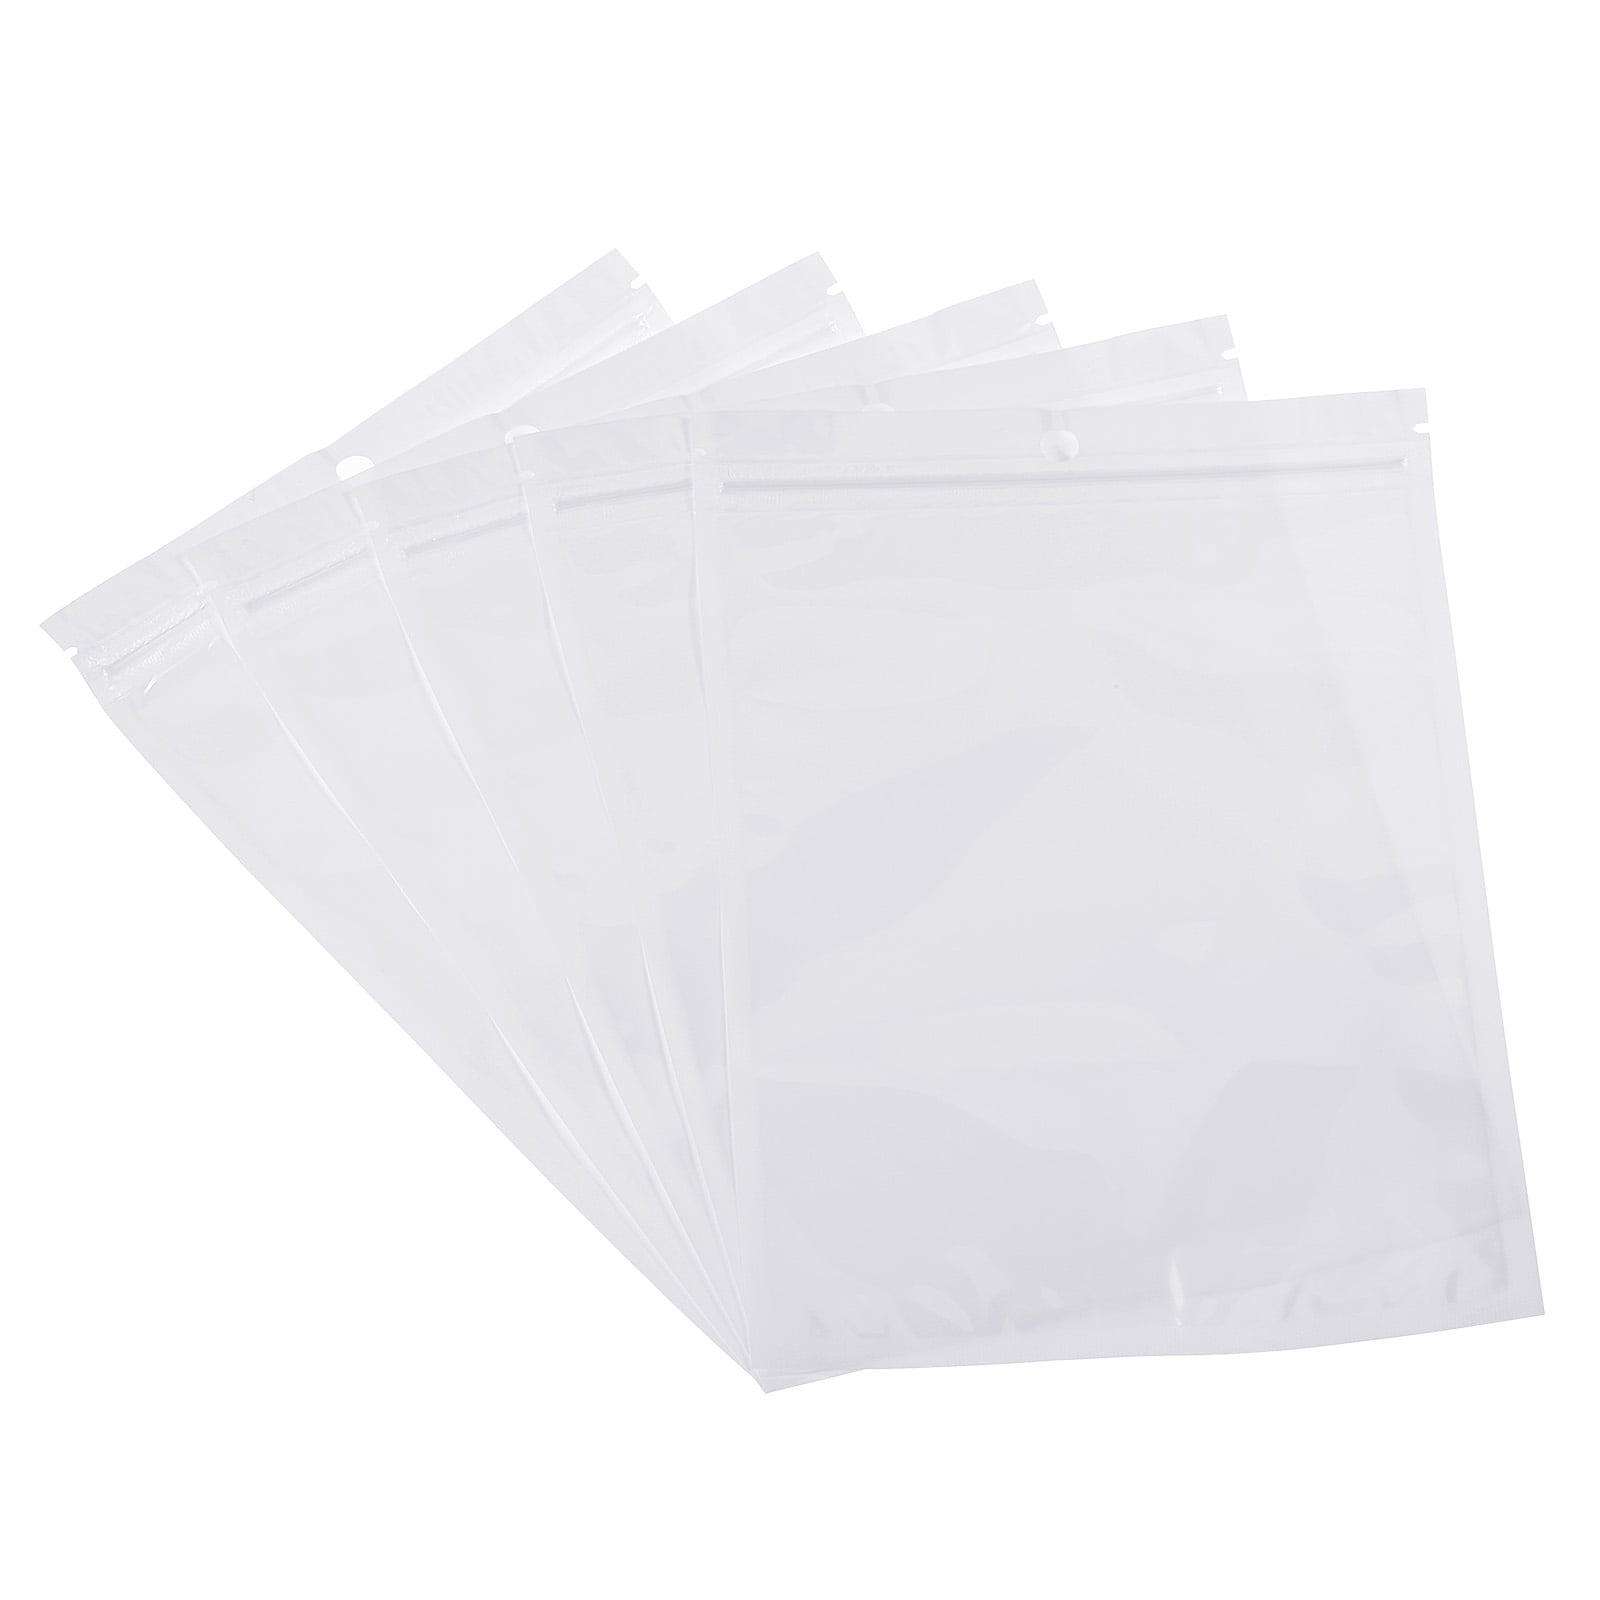 Uxcell 6.3x3.5 Holographic Bags, 100 Pack PET Plastic Resealable